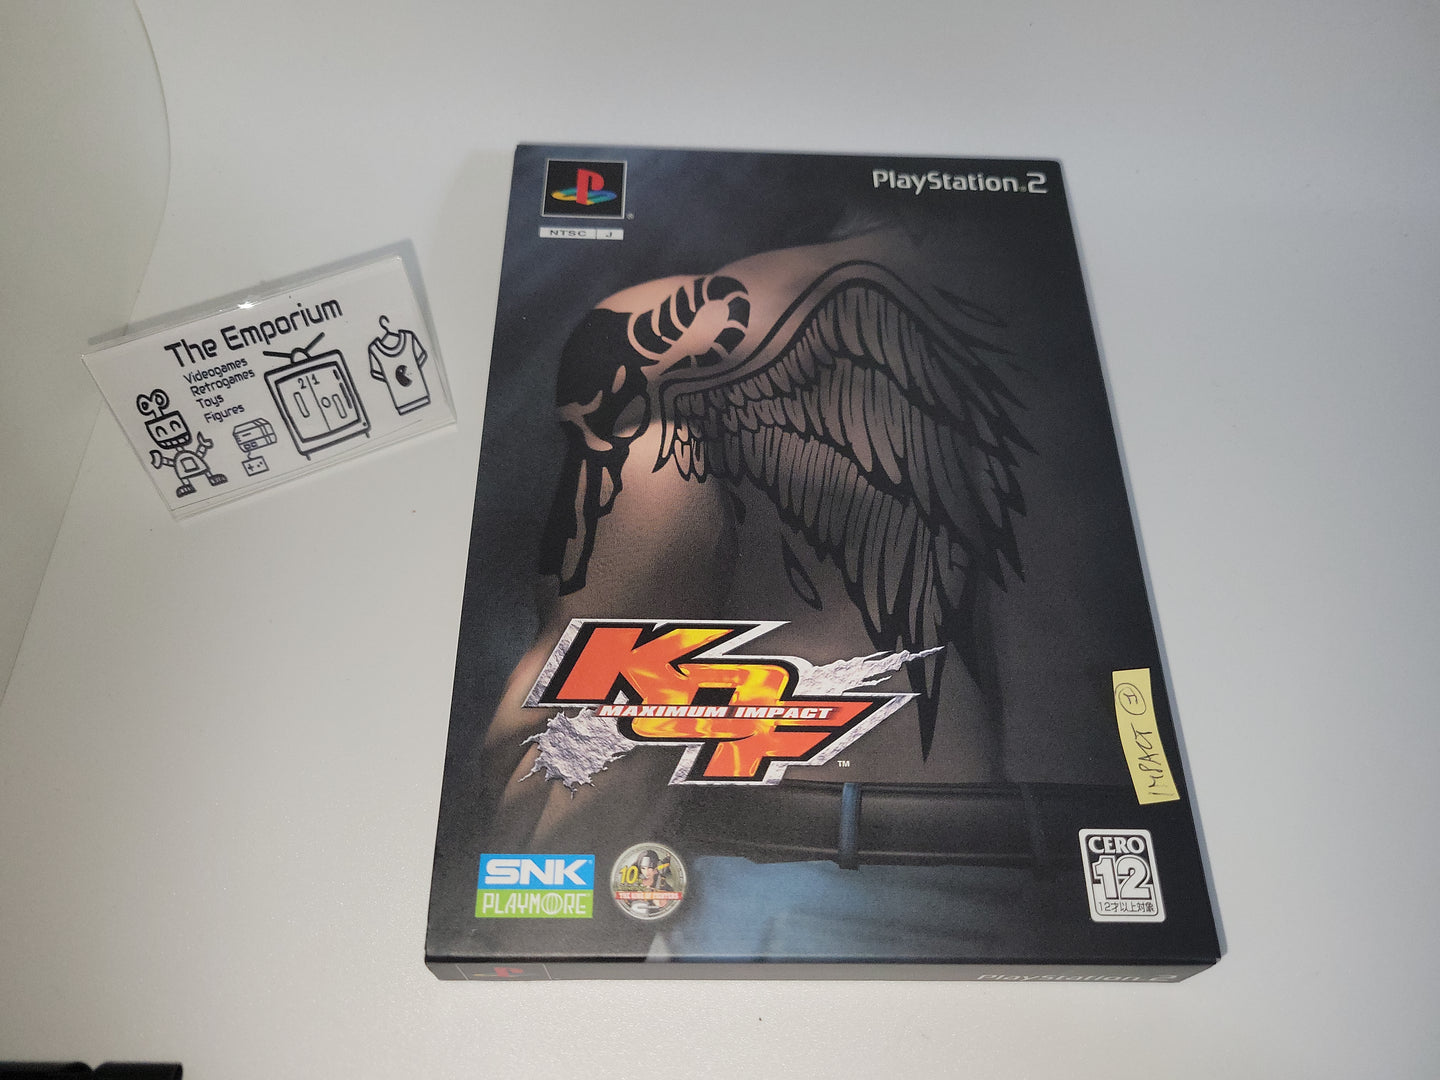 The King of Fighters: Maximum Impact (w/ Guide Book & Bonus DVD) - Sony playstation 2